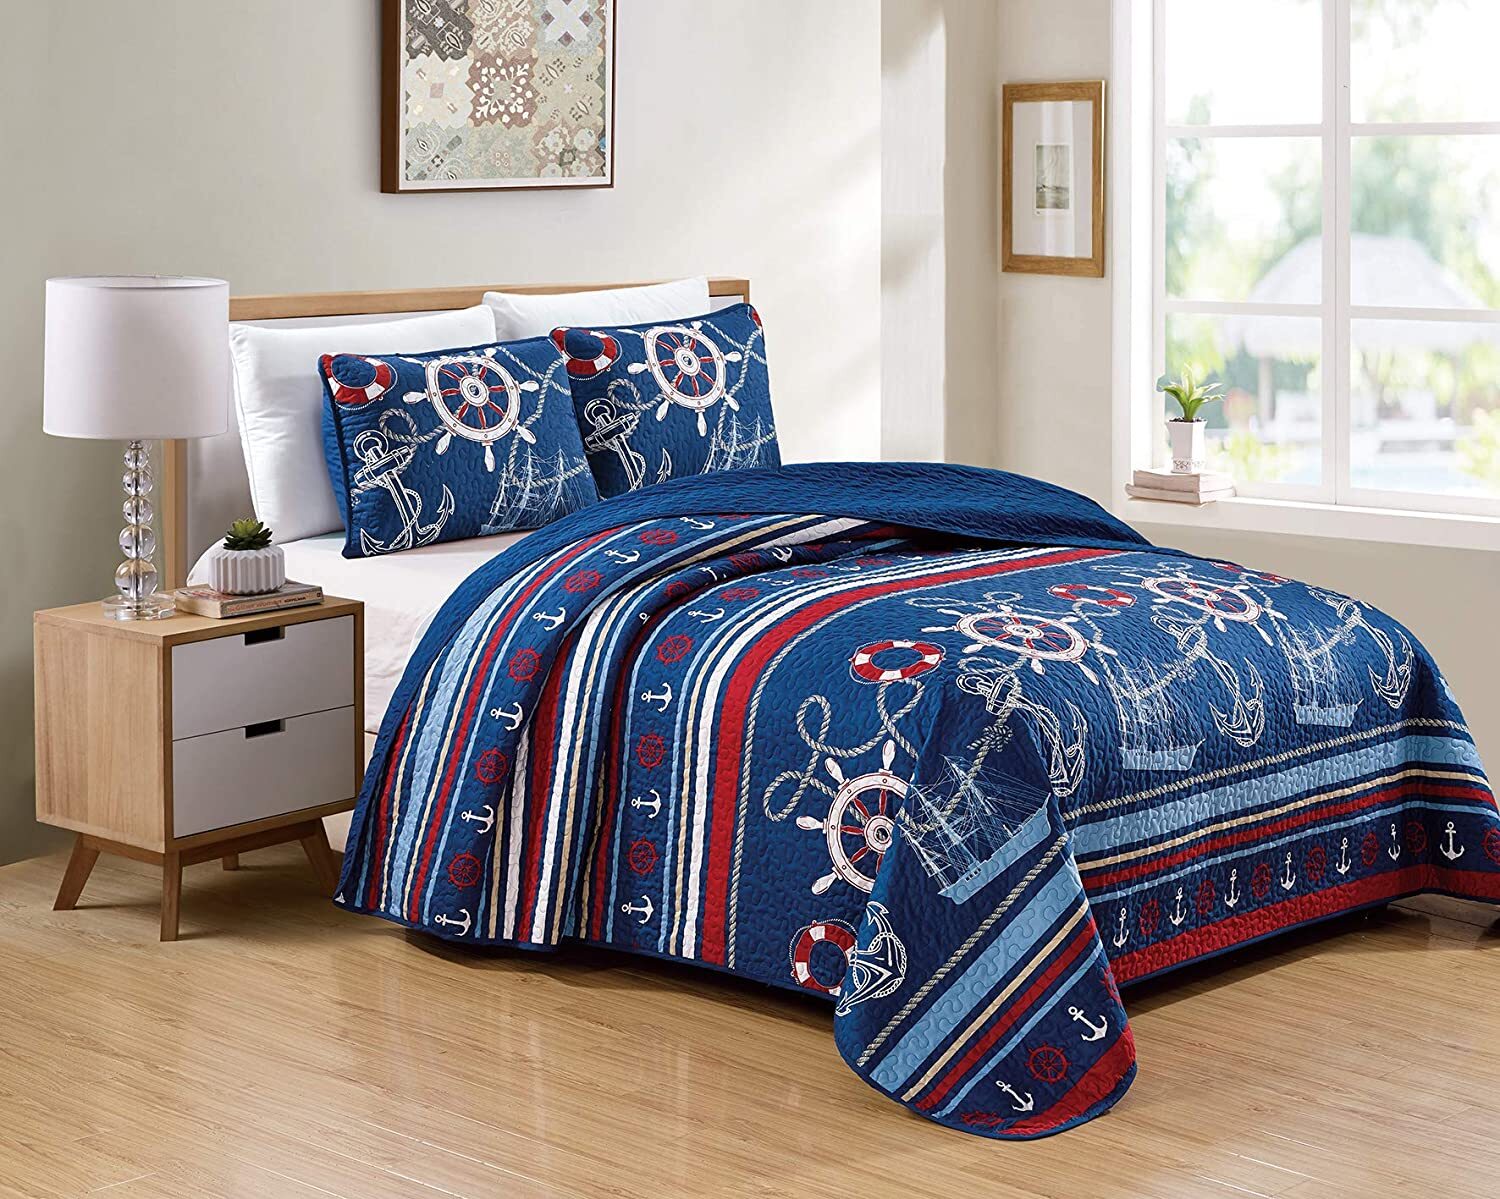 Navy Nautical Themed Quilt Pattern